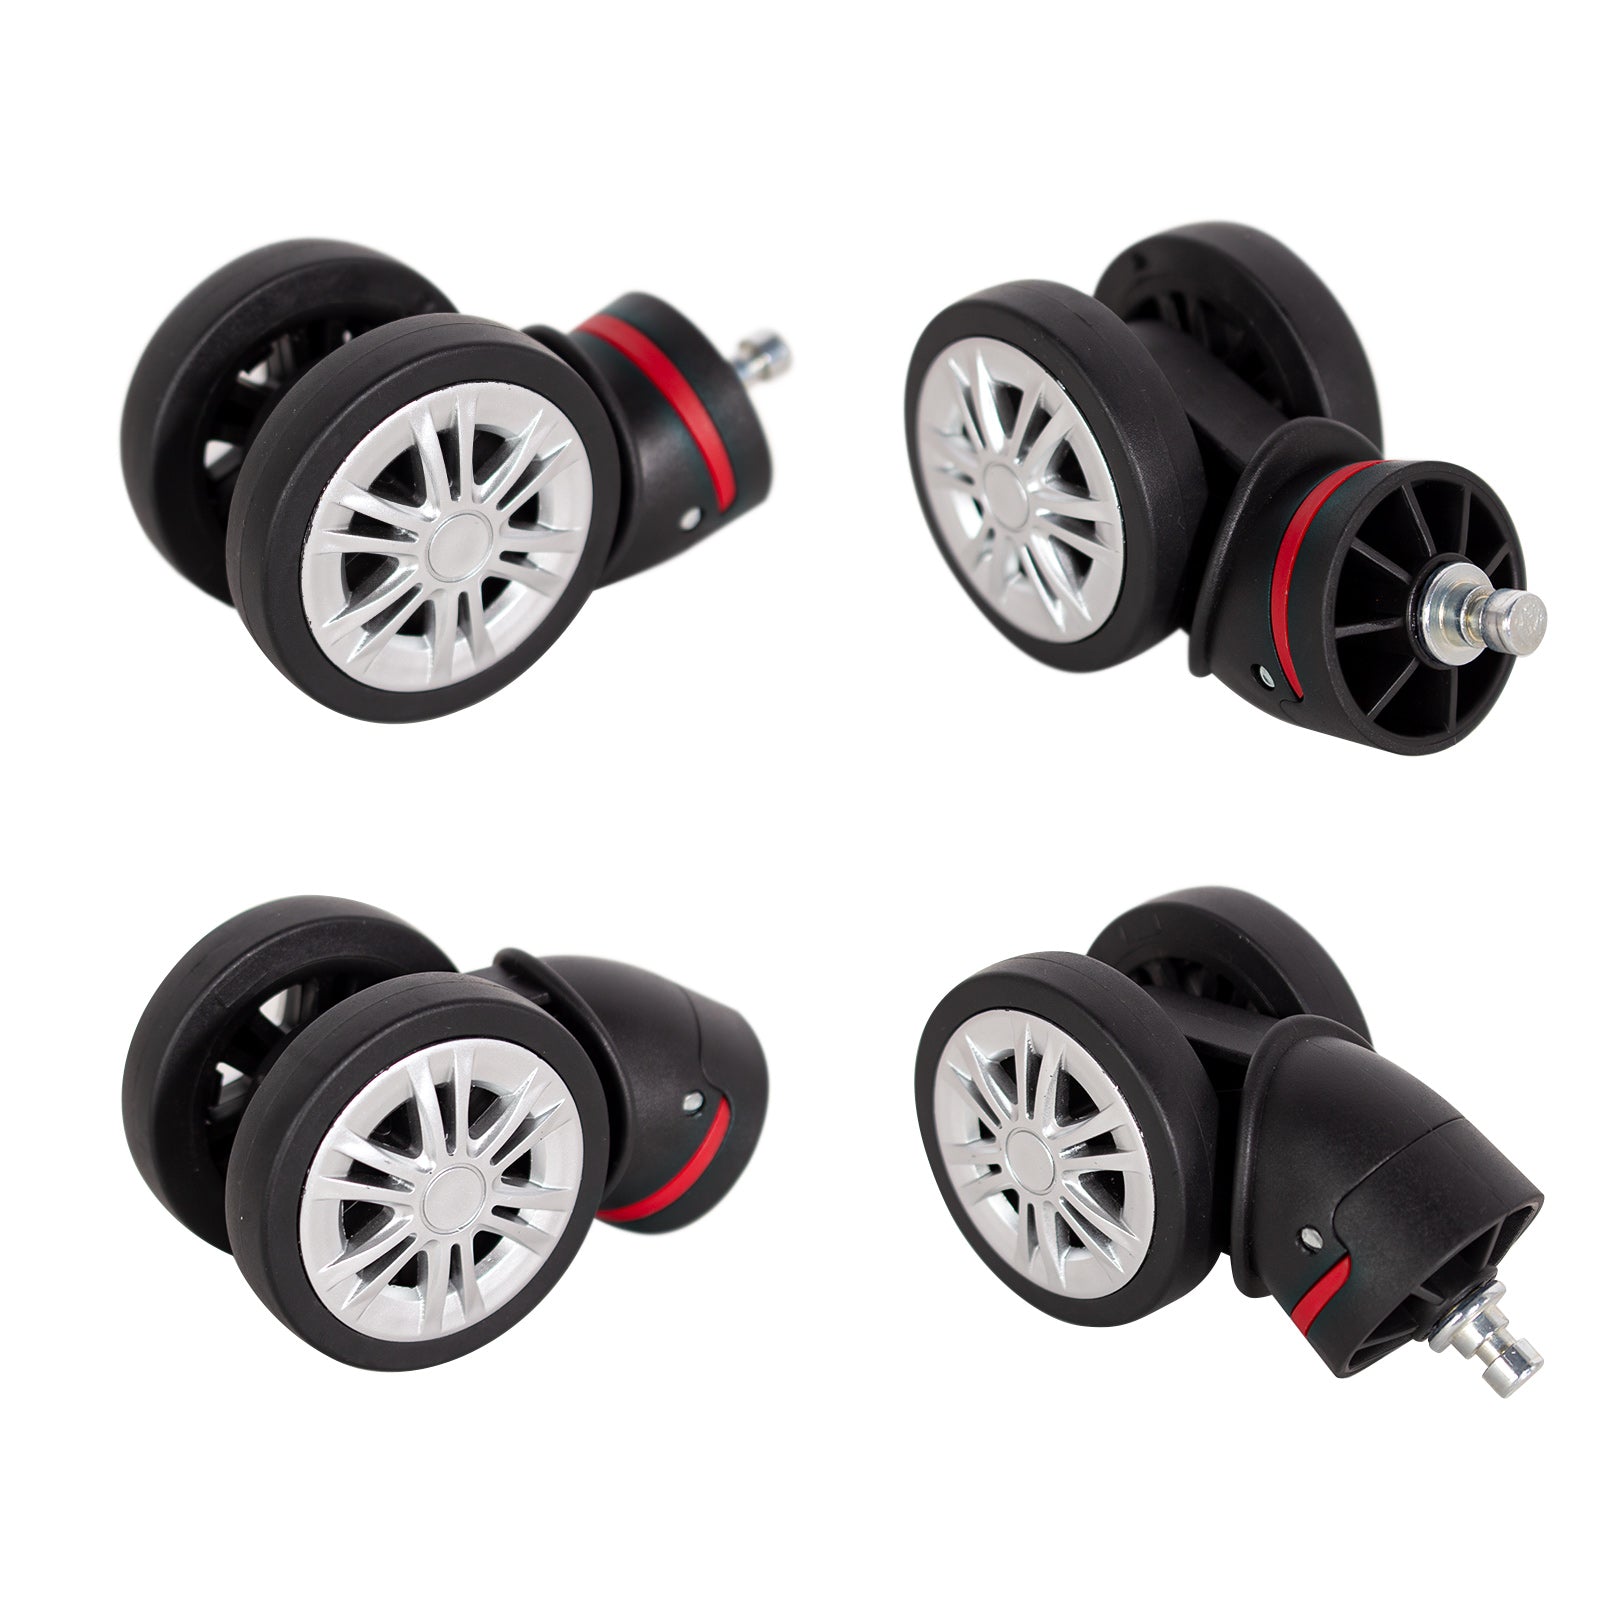 4-Pieces-Luggage-Suitcase-Wheels-Durable-Swivel-Casters-for-Luggage-Replacement-Wheels-for-Suitcases-4-Pieces-Luggage-Suitcase-Wheels